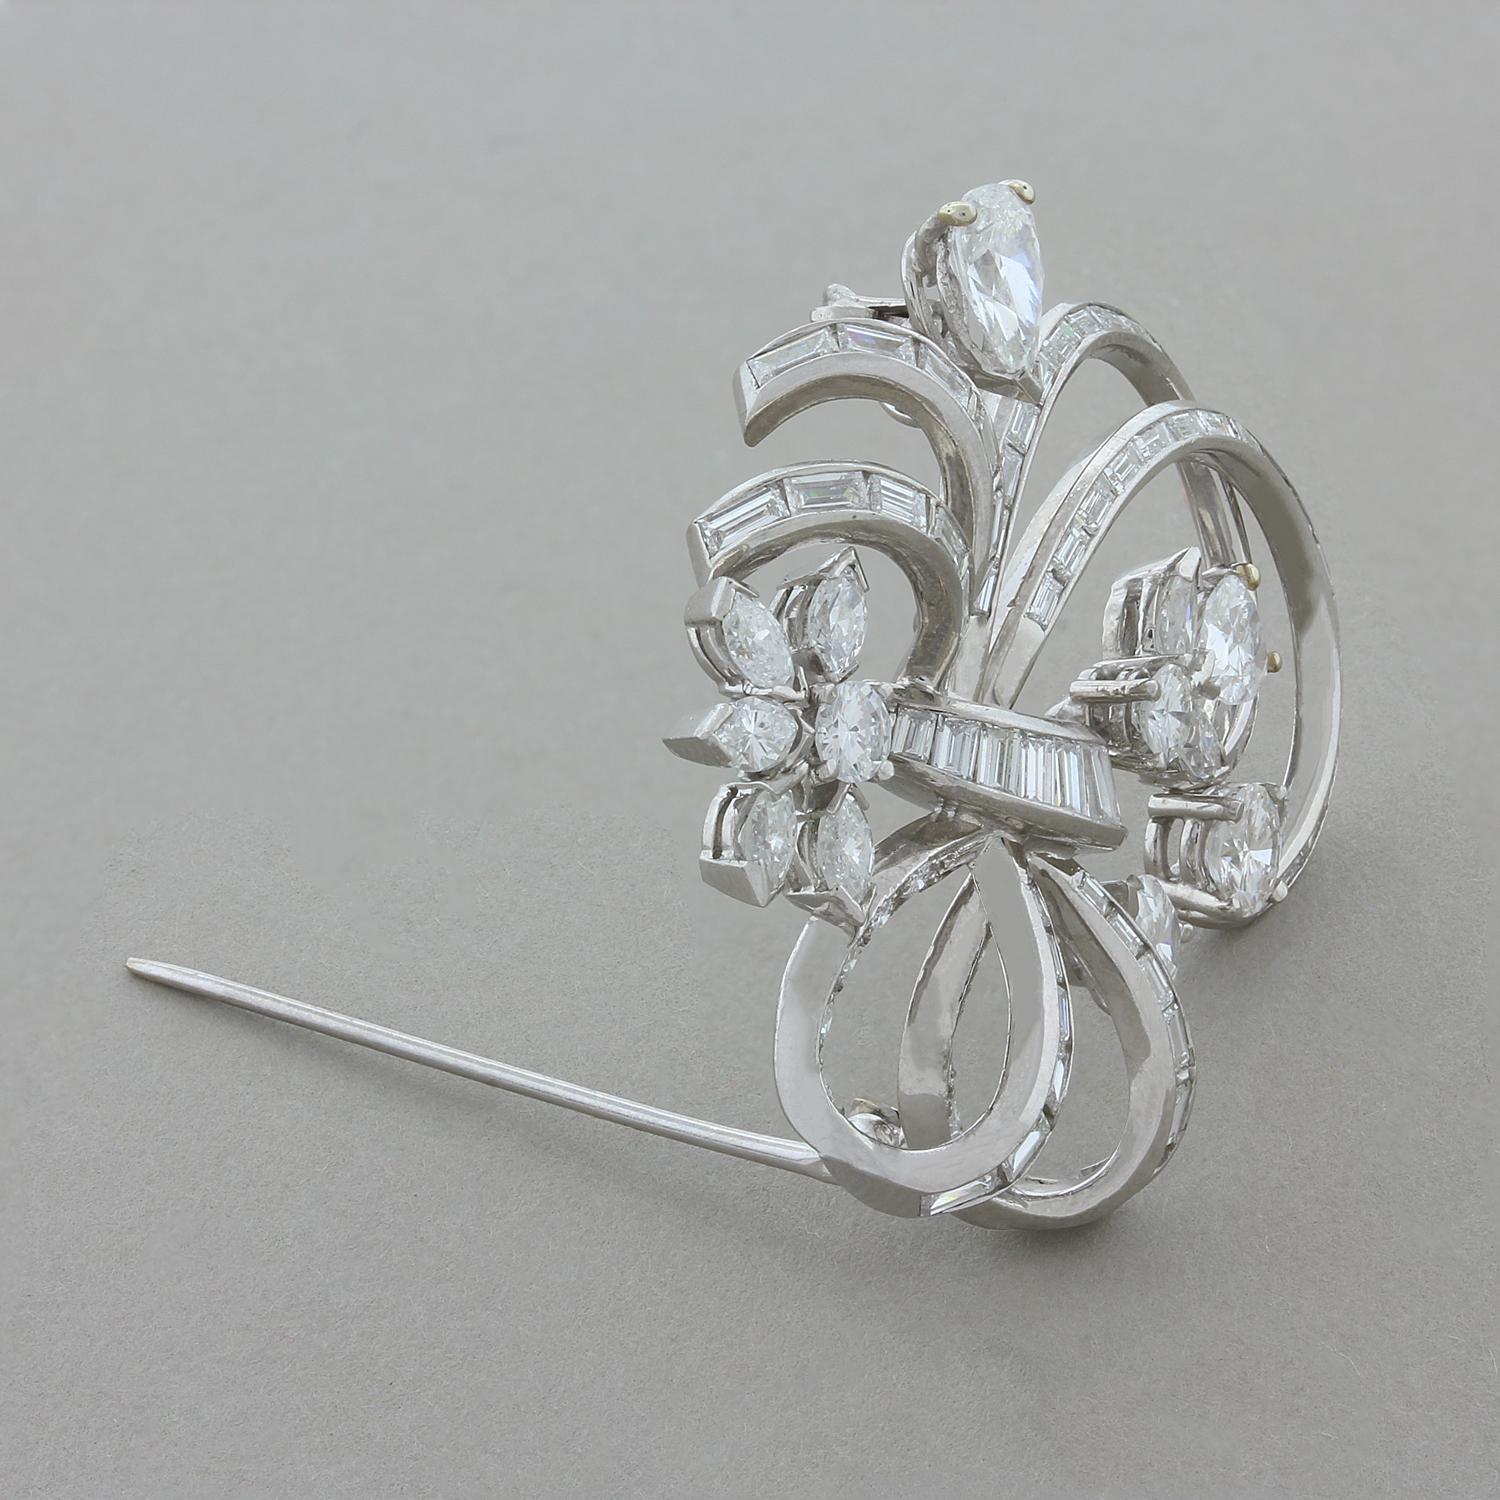 A beautiful platinum brooch from the 1950’s featuring 6.00 carats of diamond, including round and baguette cuts that create loops and curves around the piece. They are accented my larger sized marquise, pear and round cut diamonds that are clustered